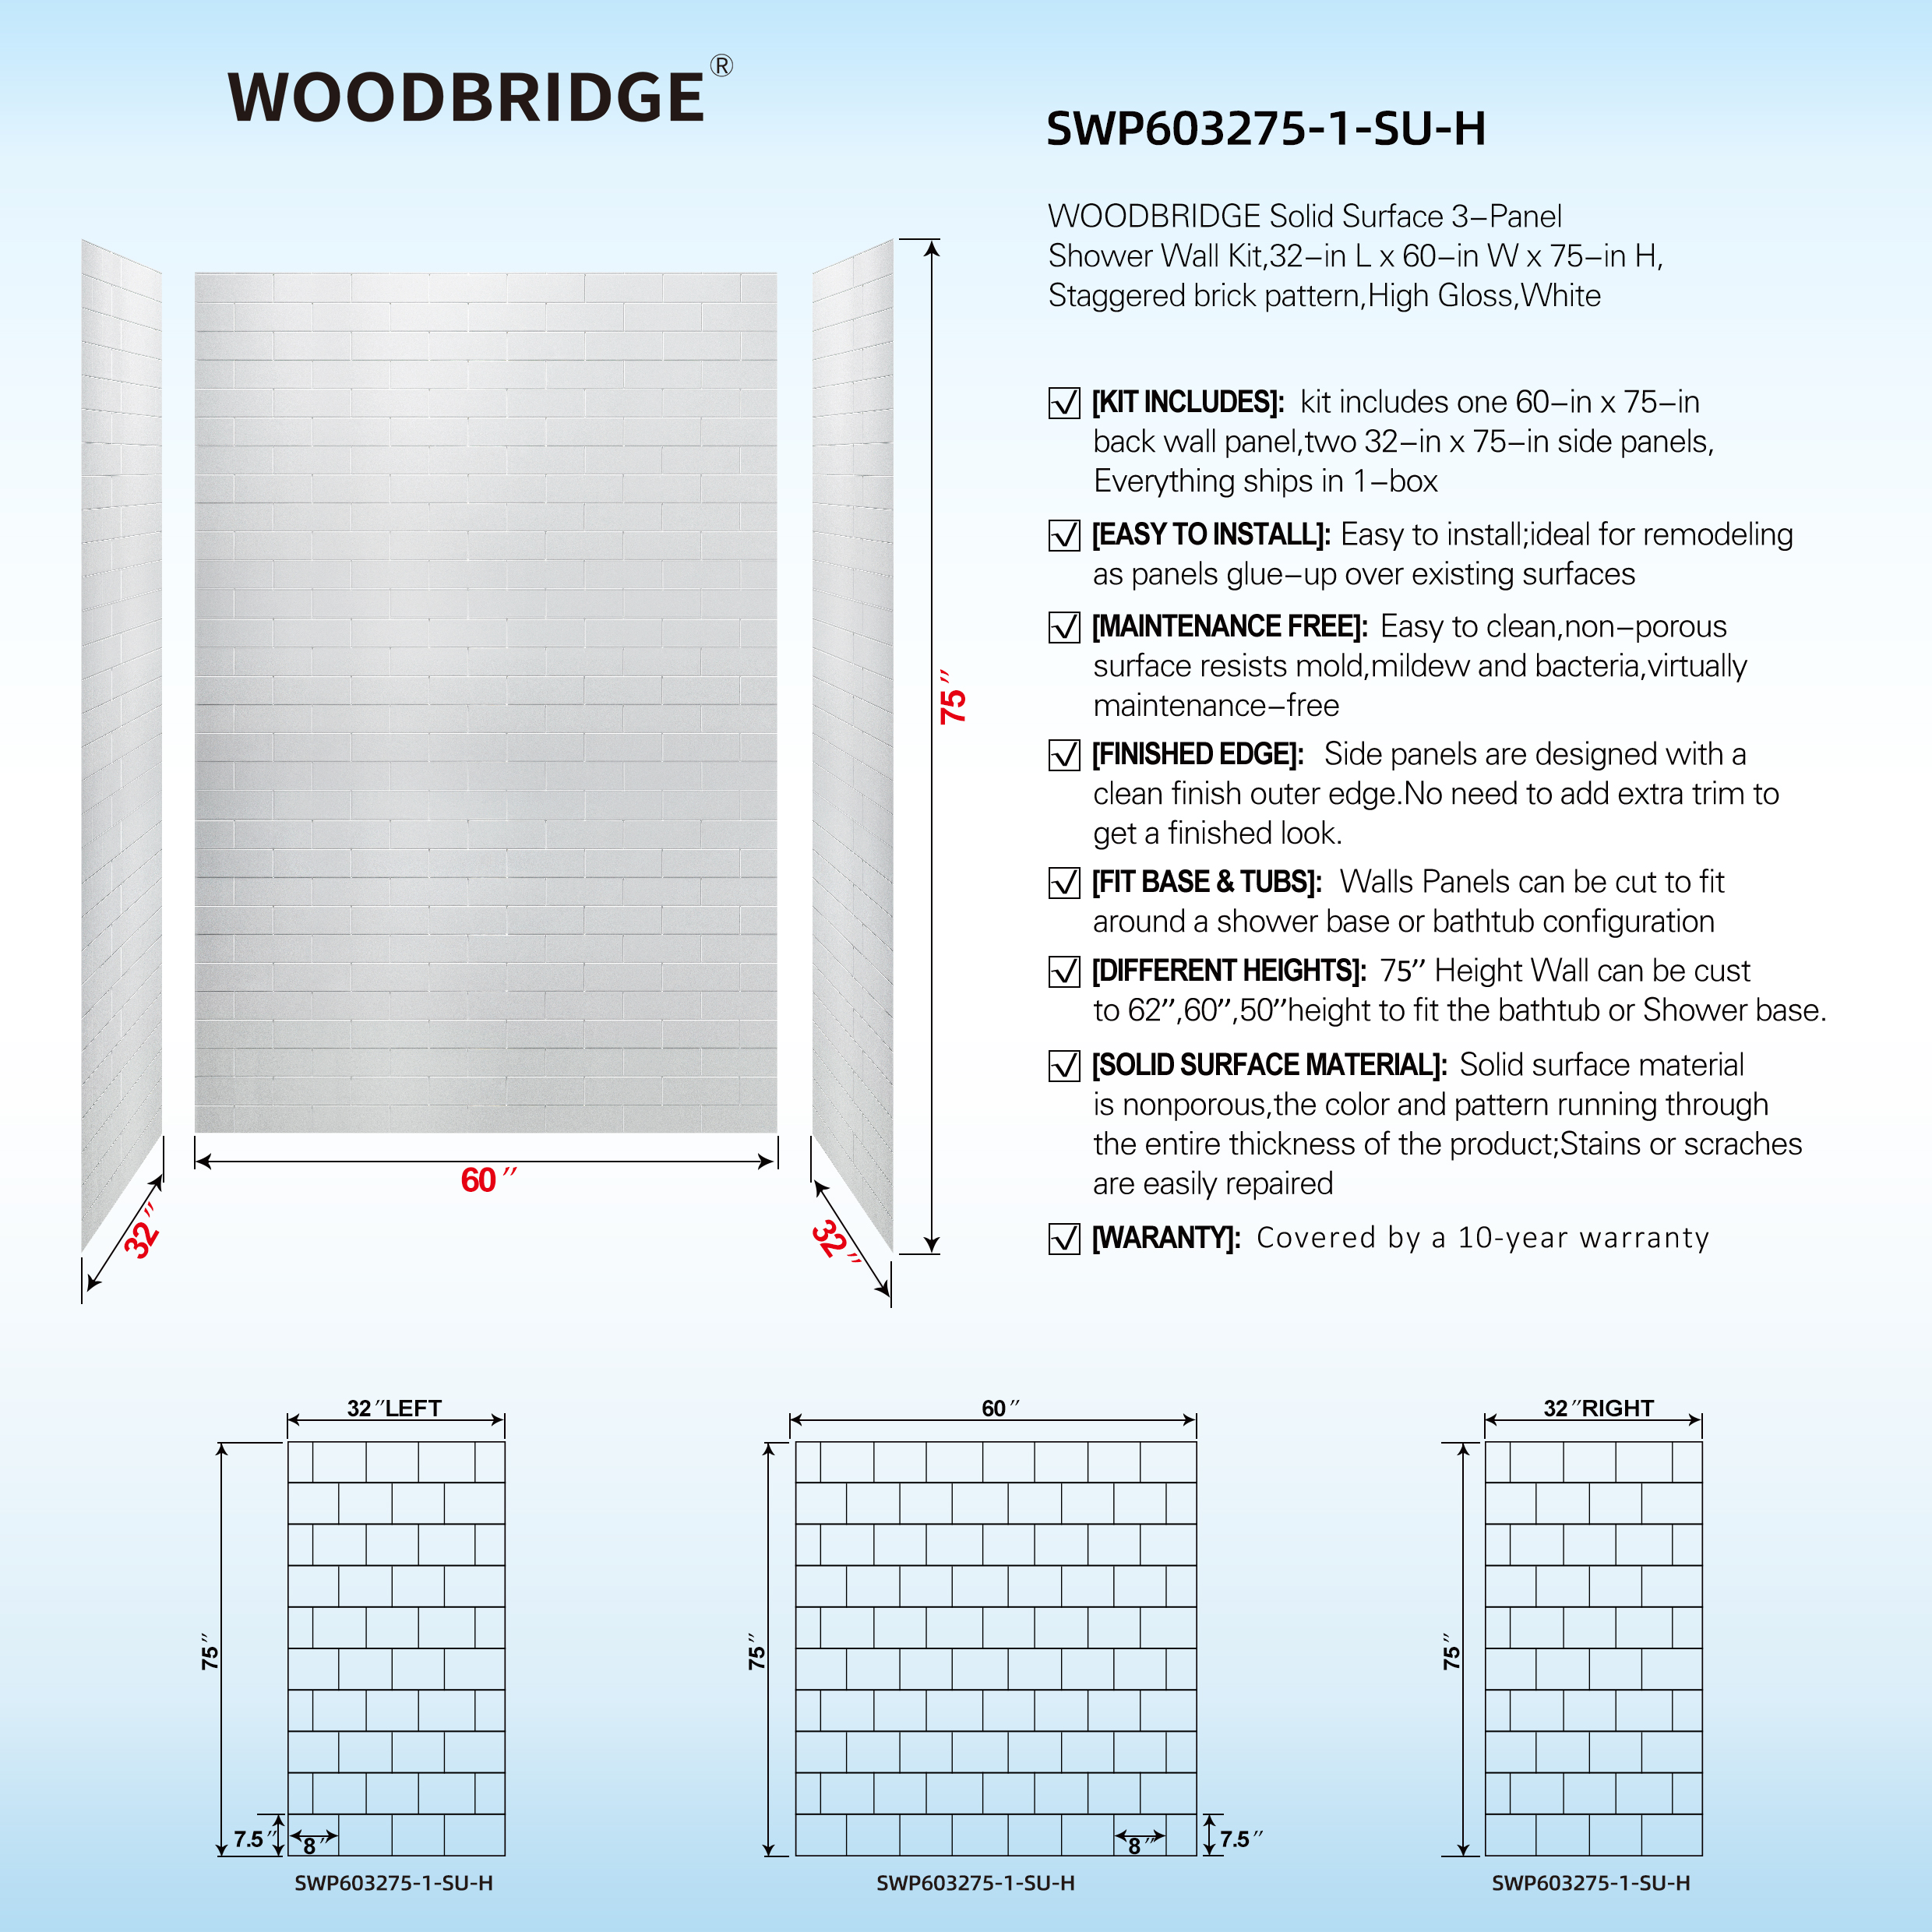  WOODBRIDGE  Solid Surface 3-Panel Shower Wall Kit, 32-in L x 60-in W x 75-in H, Staggered Brick Pattern, High Gloss White Finish_11702